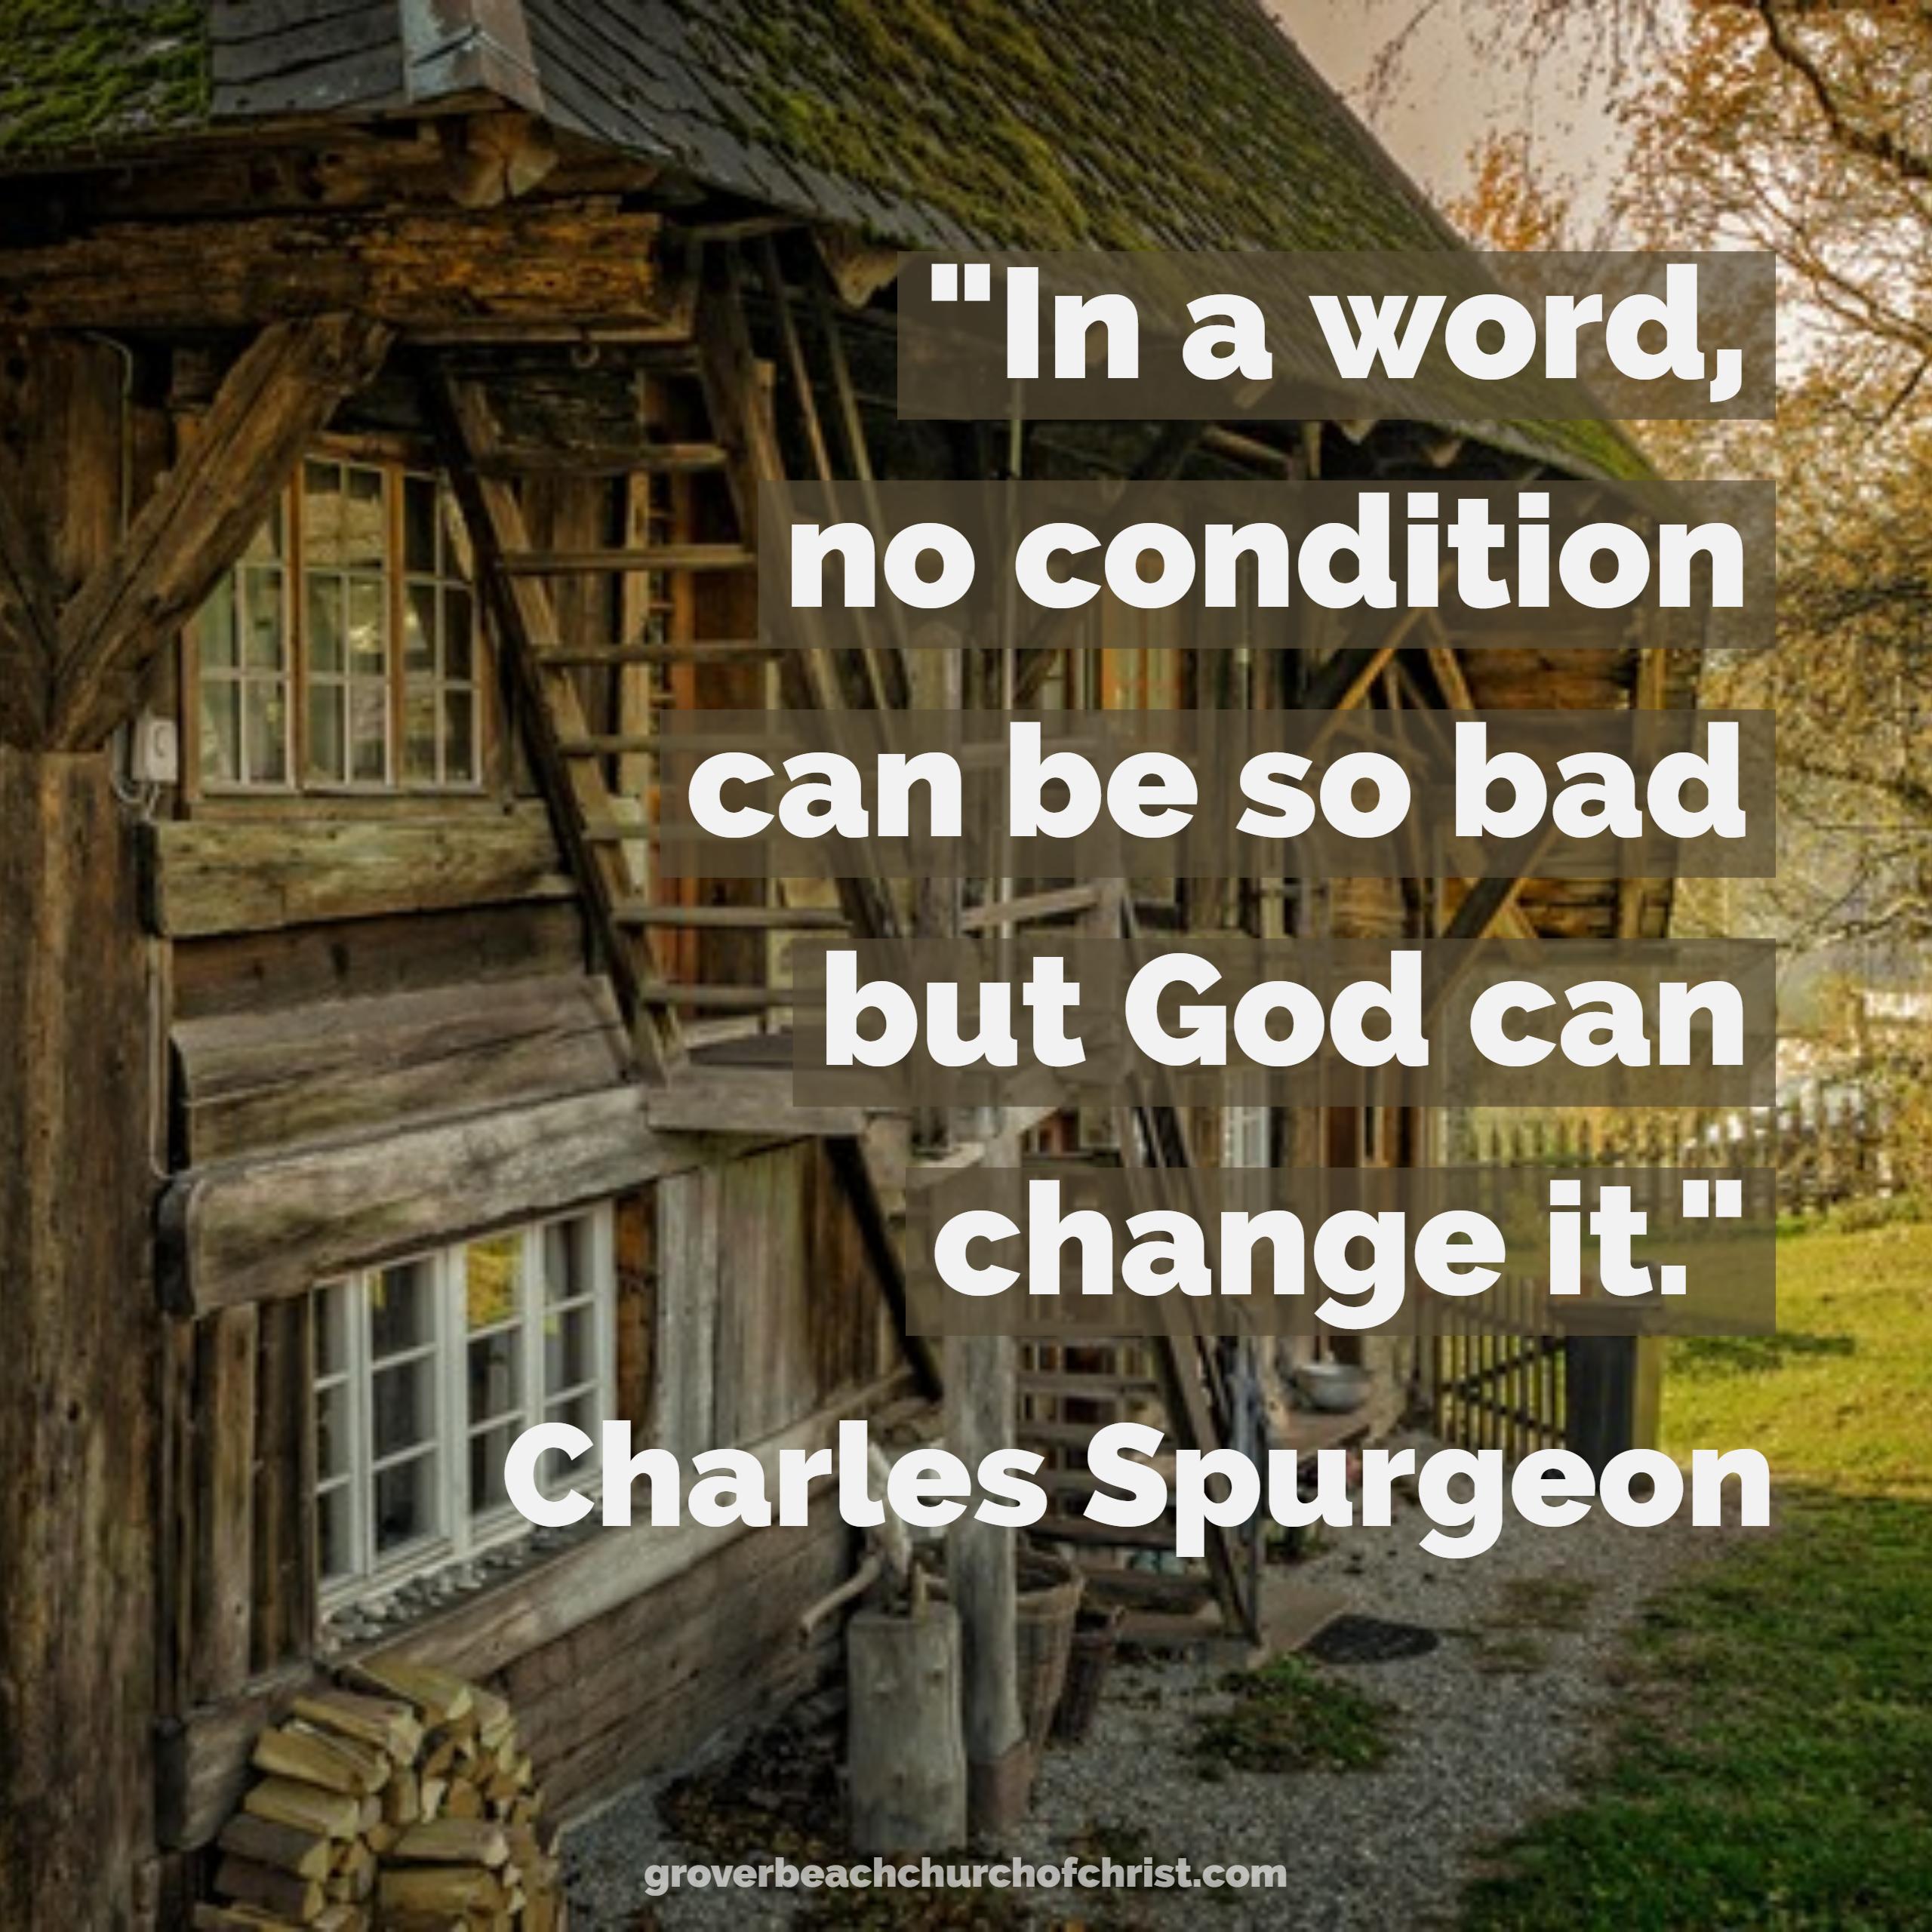 Spurgeon In a word no condition